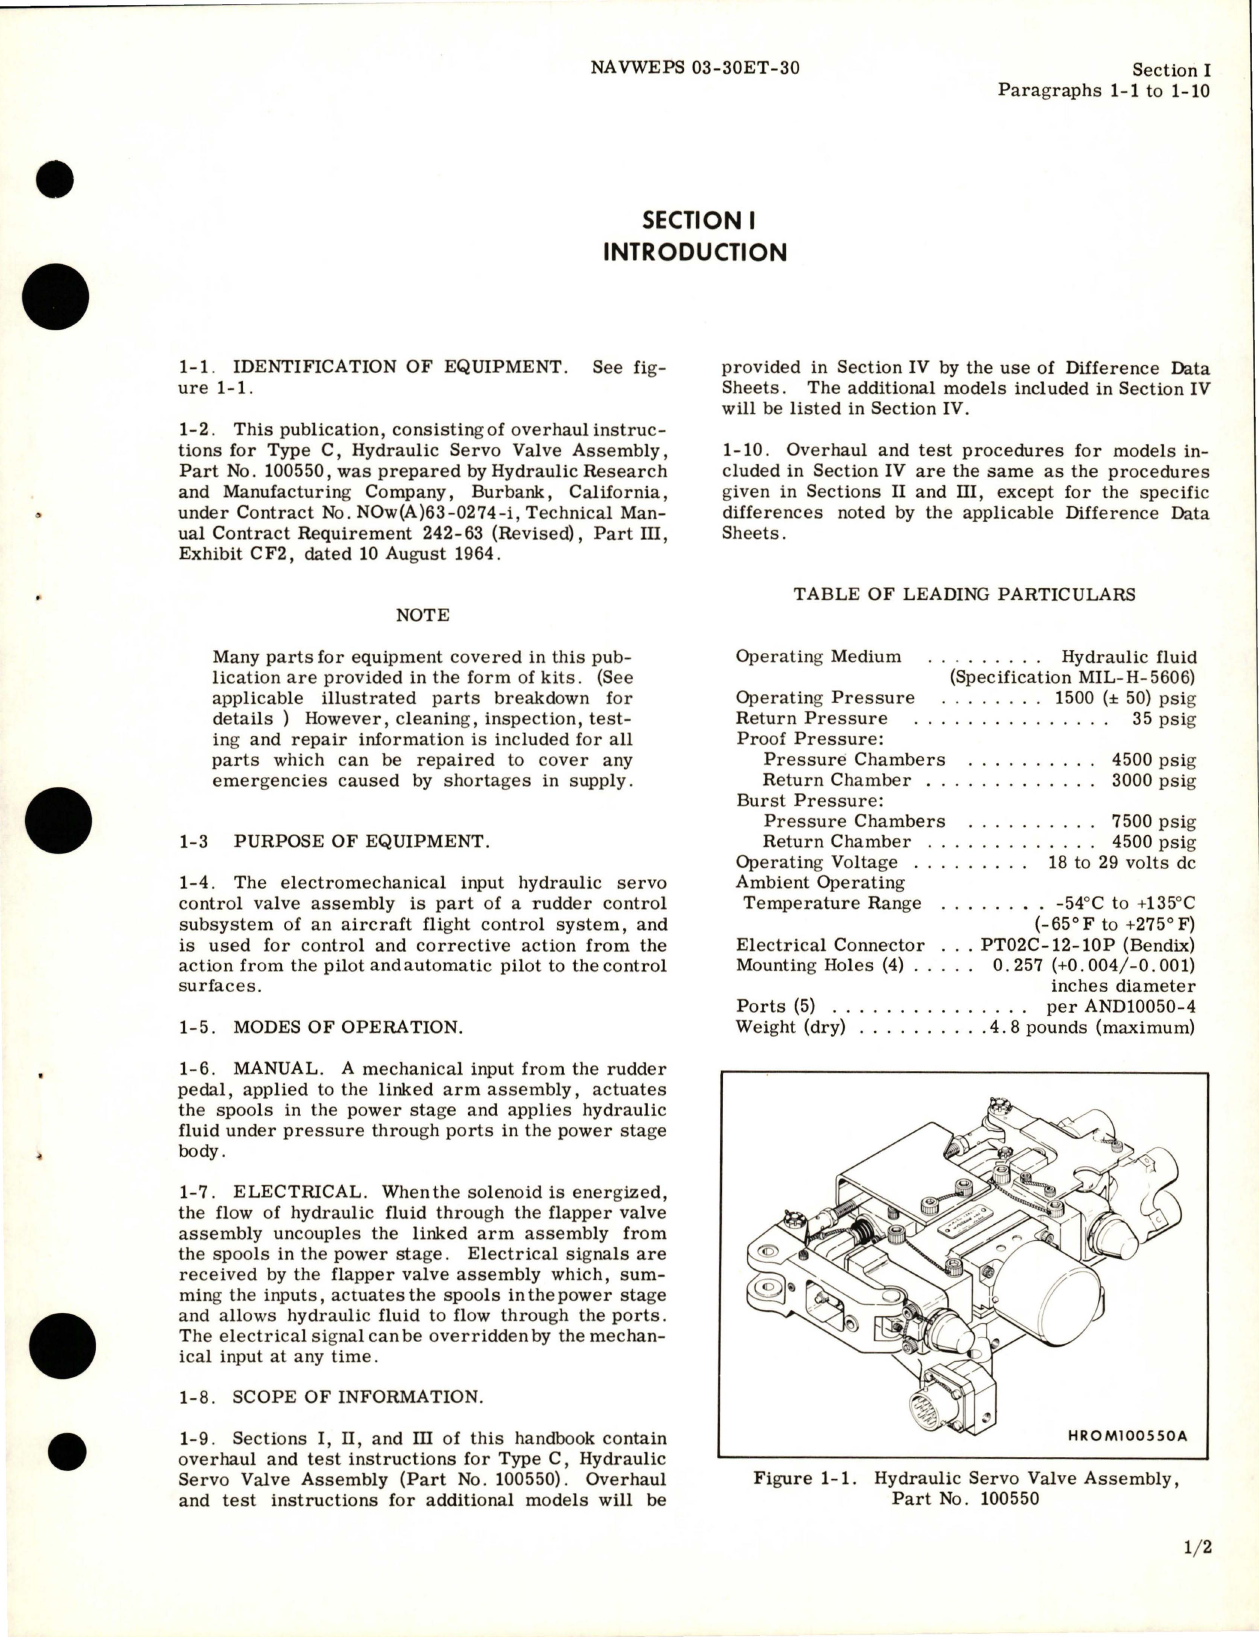 Sample page 5 from AirCorps Library document: Overhaul Instructions for Hydraulic Servo Valve Assy - Part 100550 